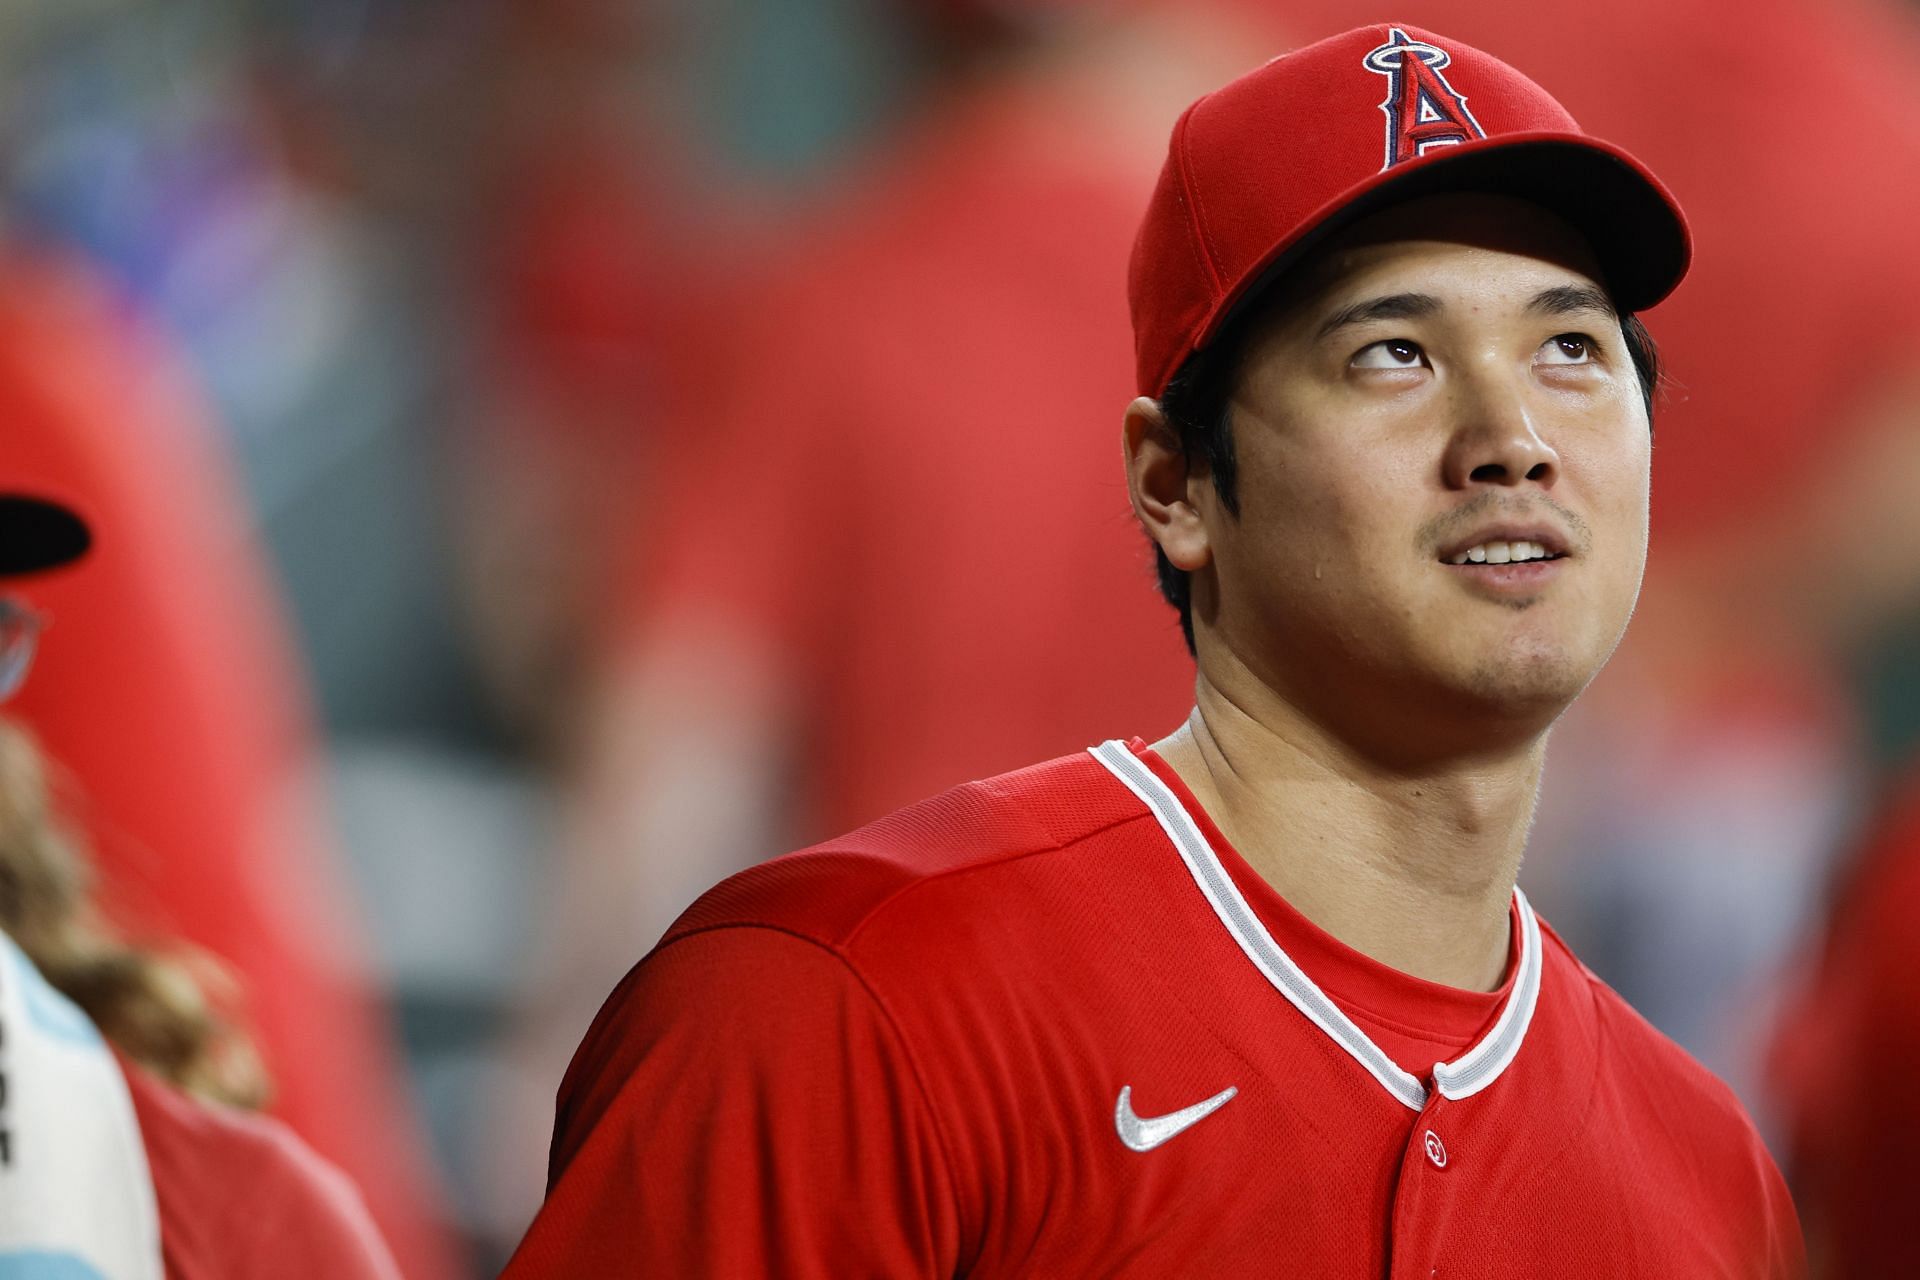 Shohei Ohtani of the Los Angeles Angels interacts with teammates prior to facing the Houston Astros at Minute Maid Park